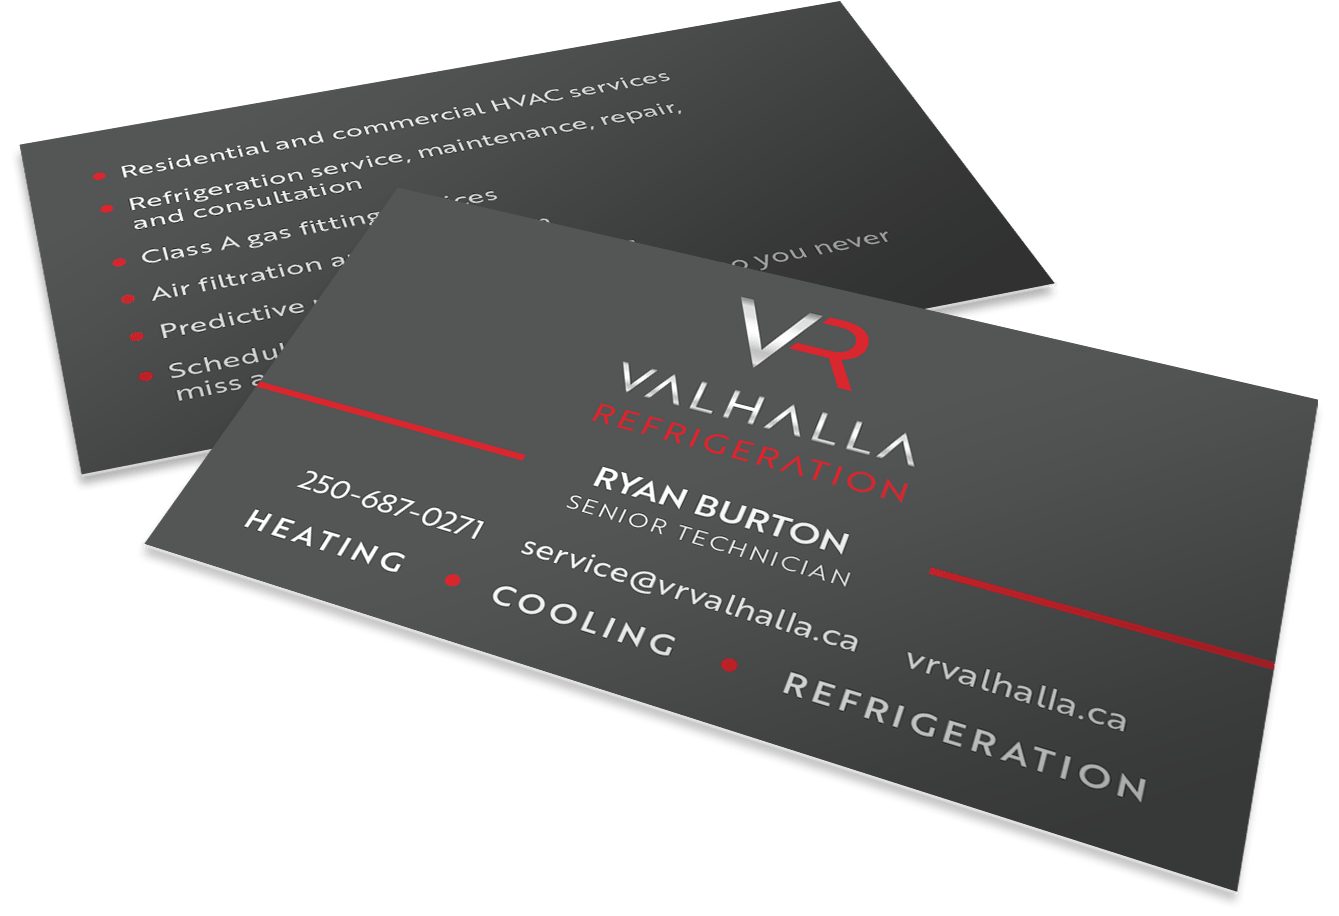 Valhalla Refrigeration in Castlegar BC, the West Kootenays, business card design and printing